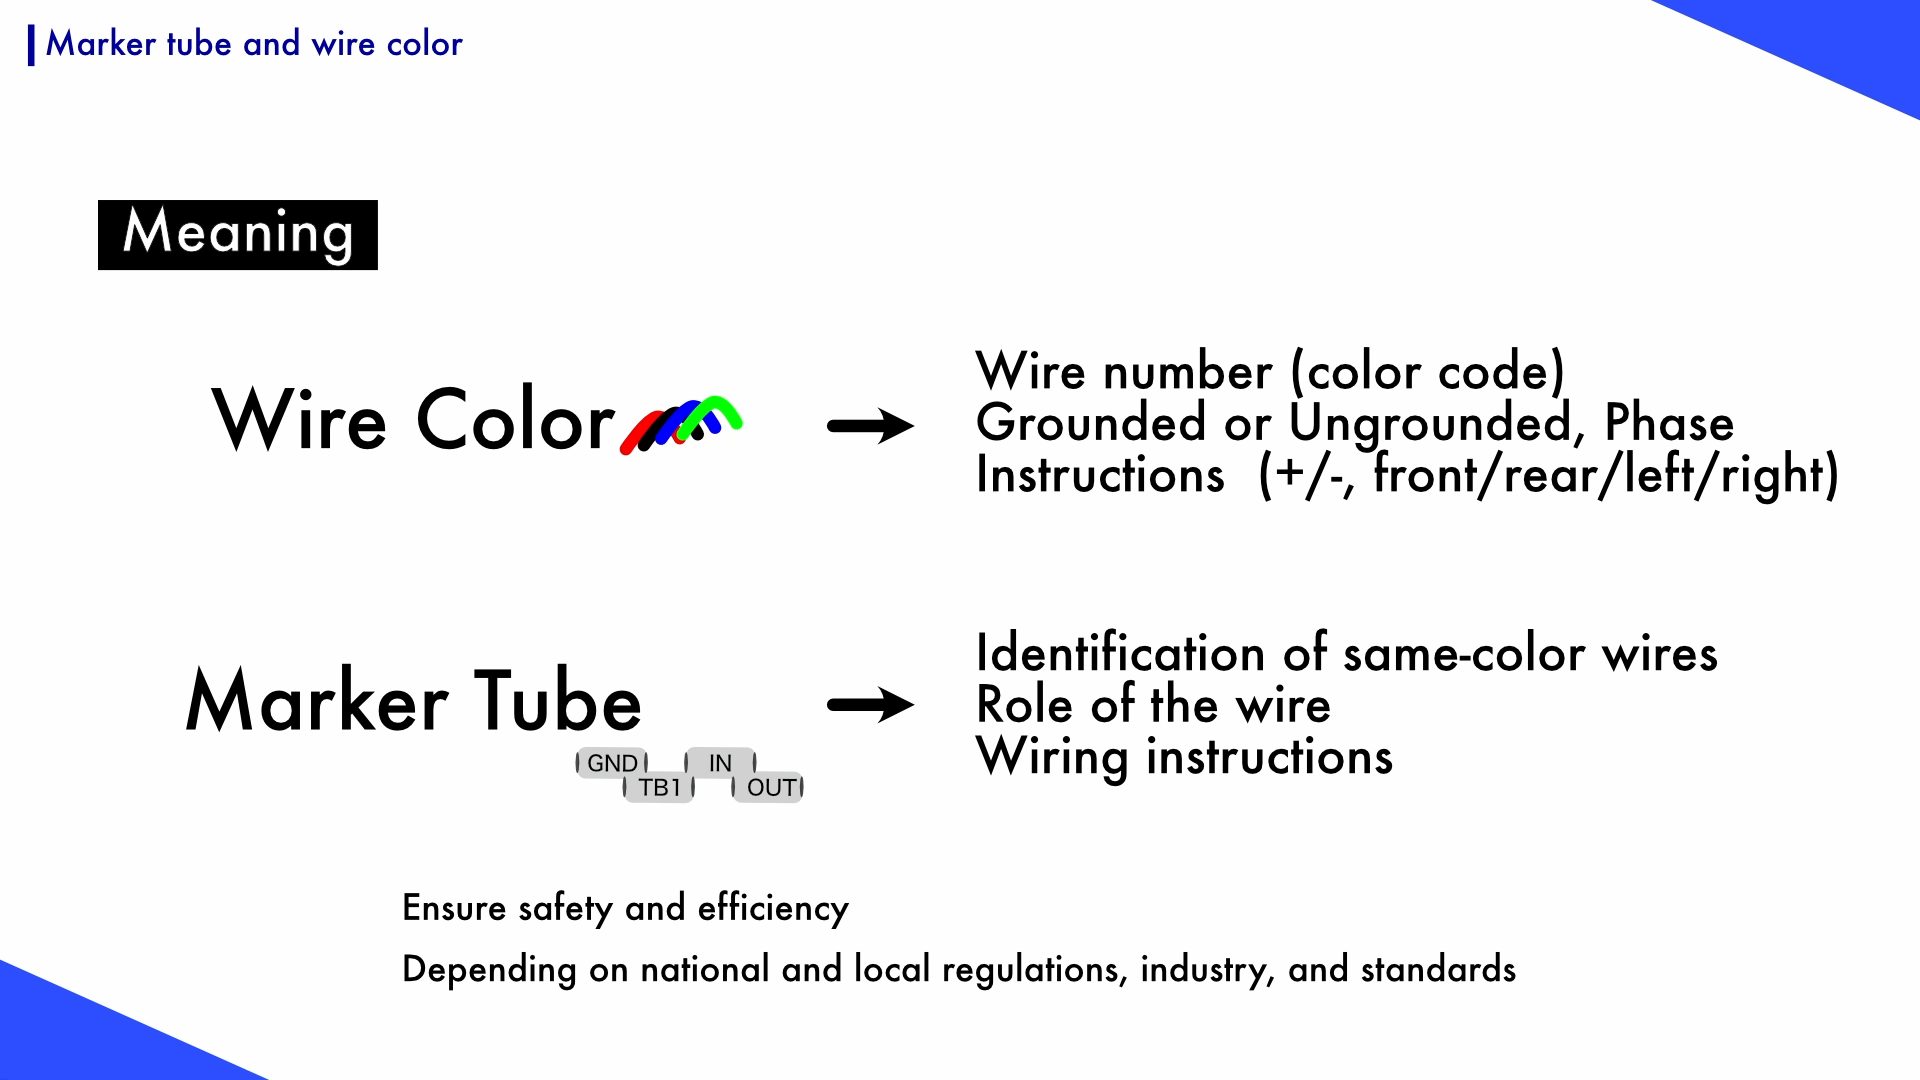 Marker tubes and wire colors in wiring harnesses have important meanings and instructions.